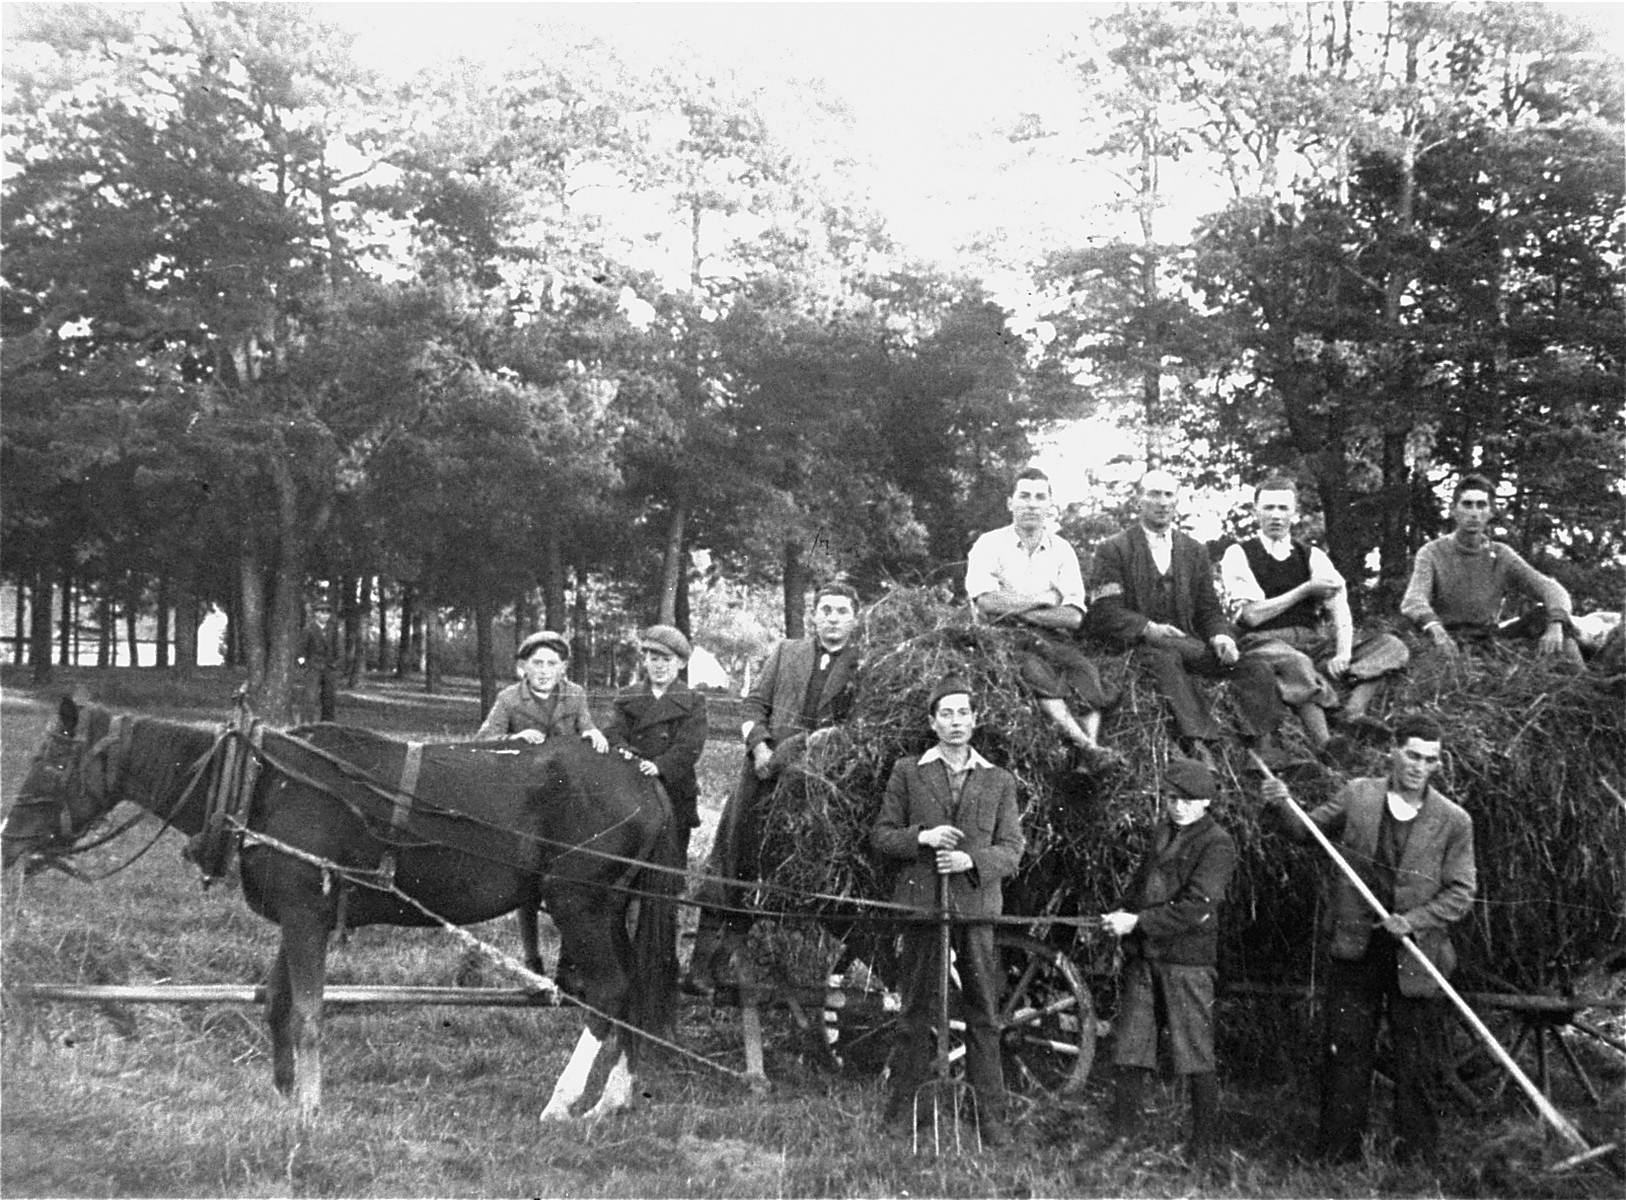 Members of the Hashomer Hatzair Zionist collective pose on a hay wagon on their farm in Zarki. 

Among those pictured are Lejzor Zborowski and Motek Weinryb.  Standing in front with the pitchfork is Arie Gutkind.